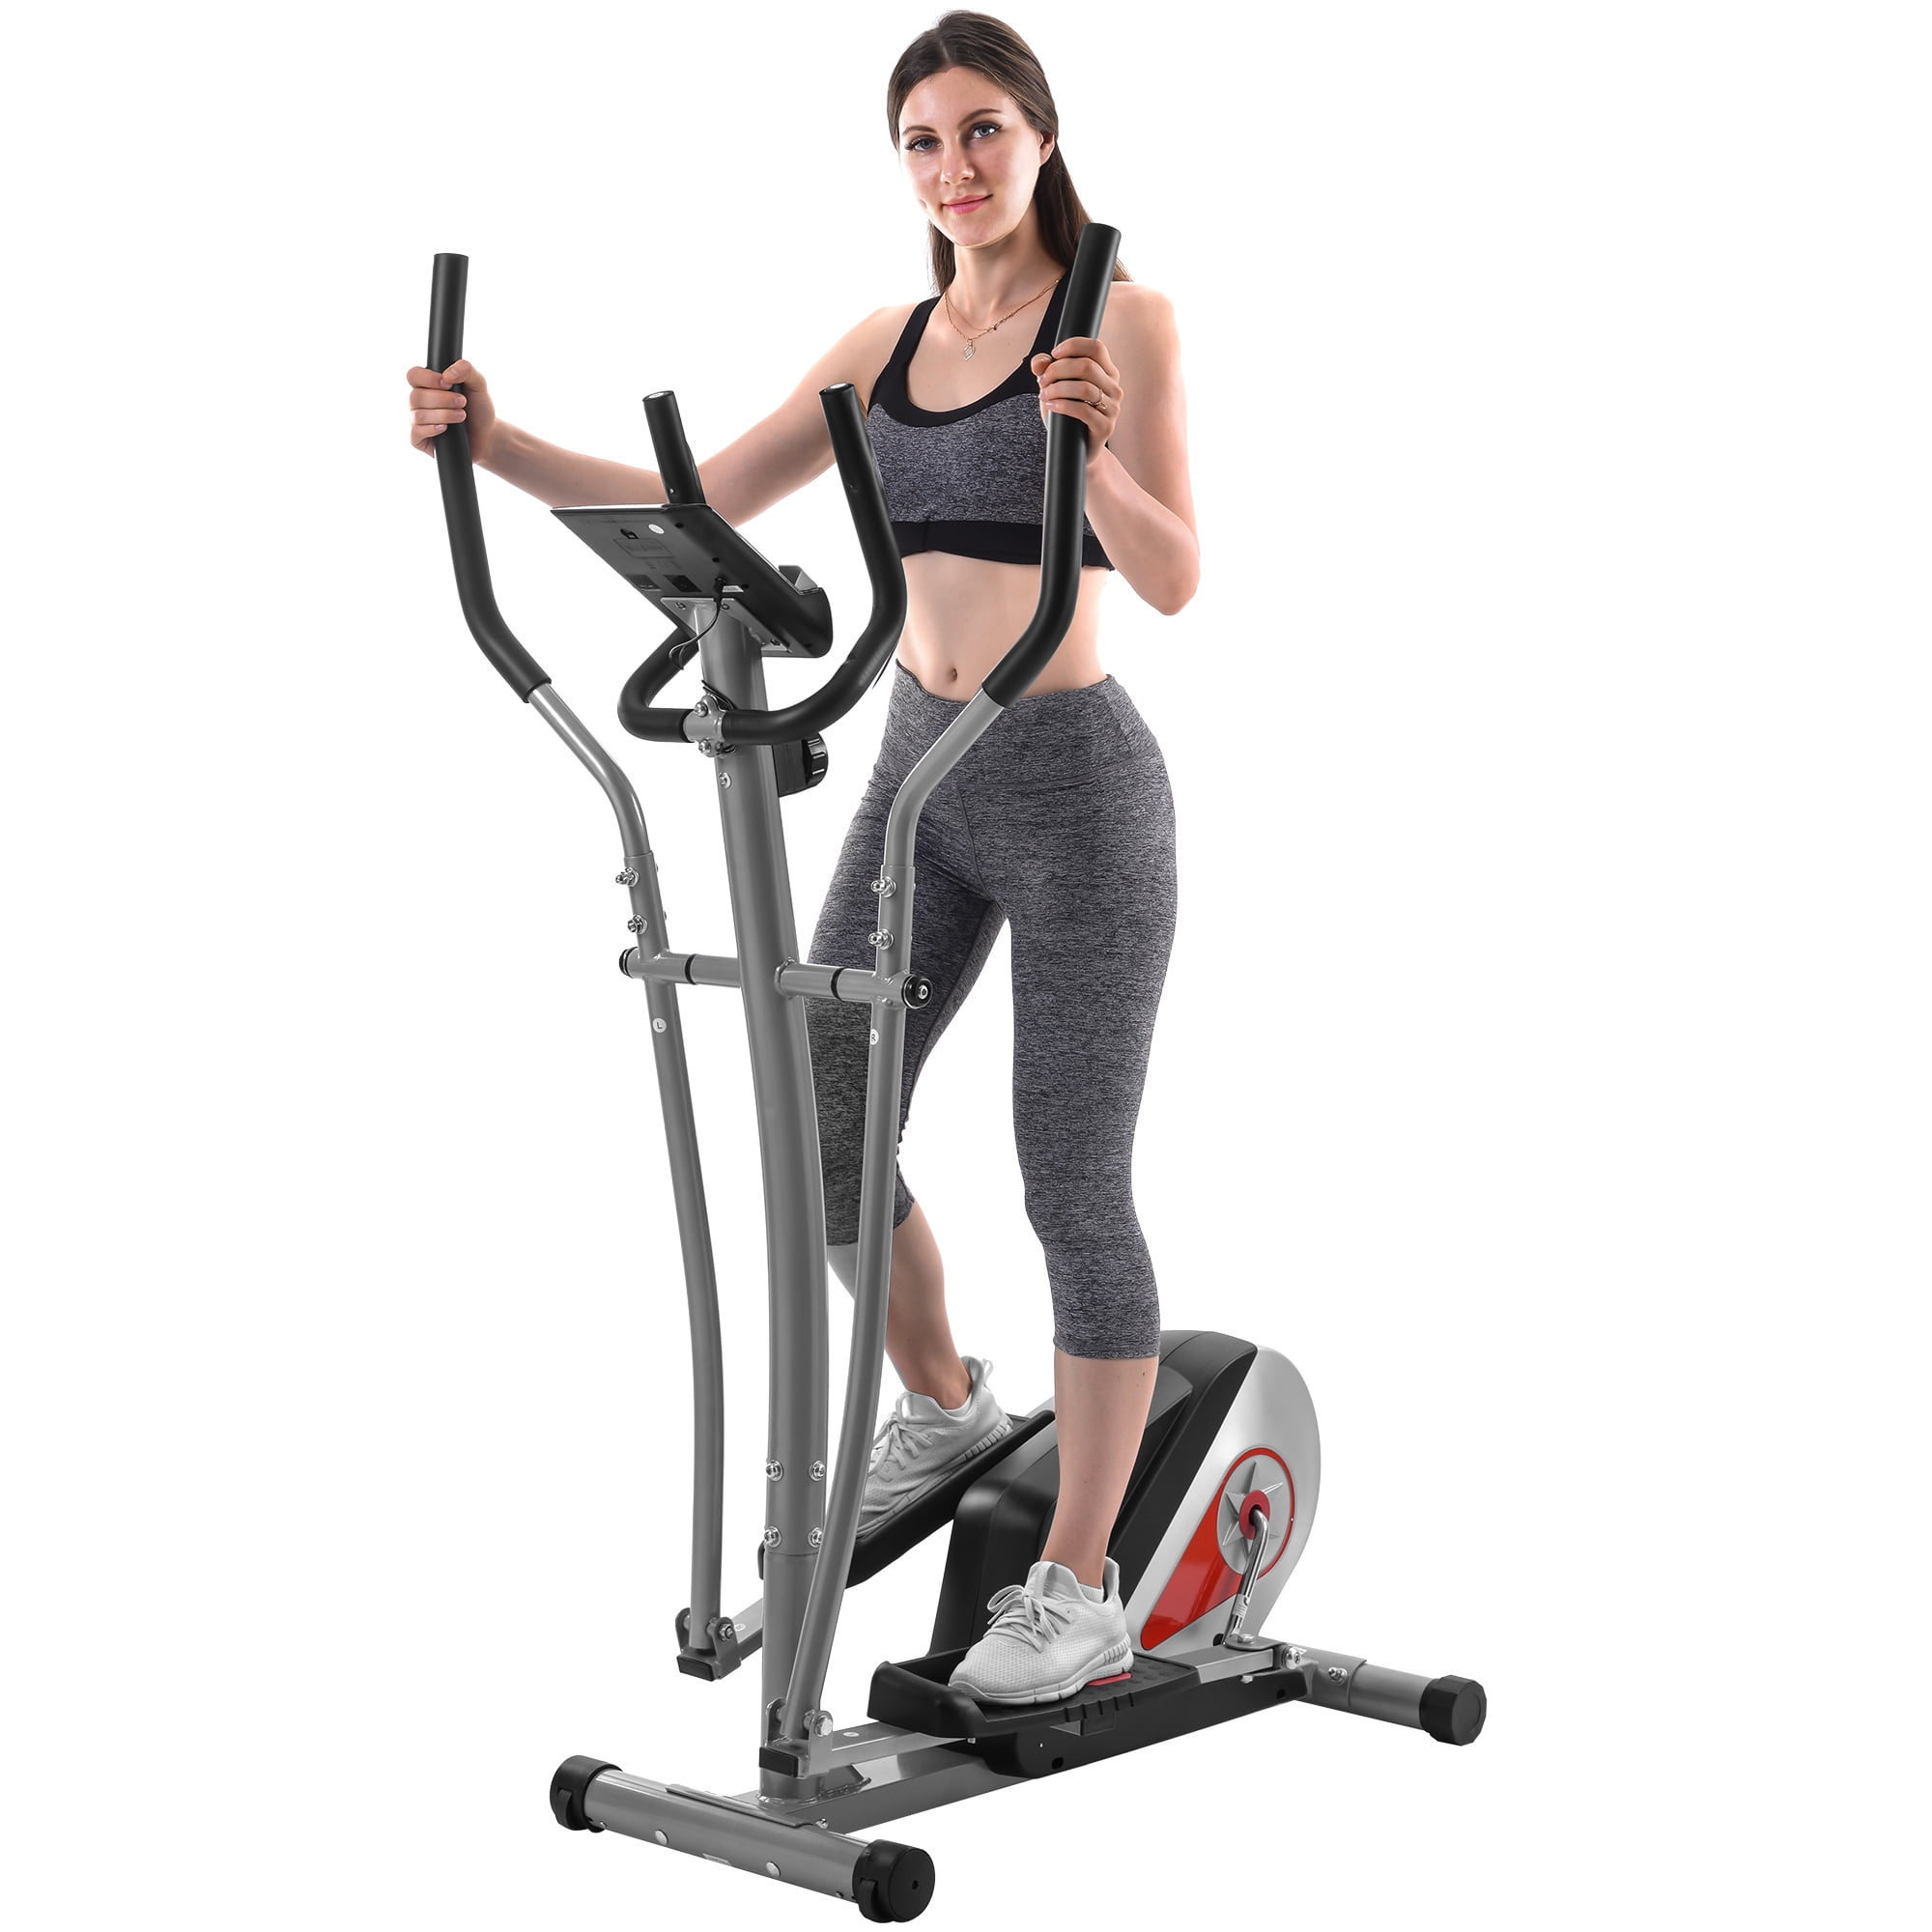 Machine Trainer Home Cross Trainer with LCD Monitor Cardio Workout Exercise Bike 